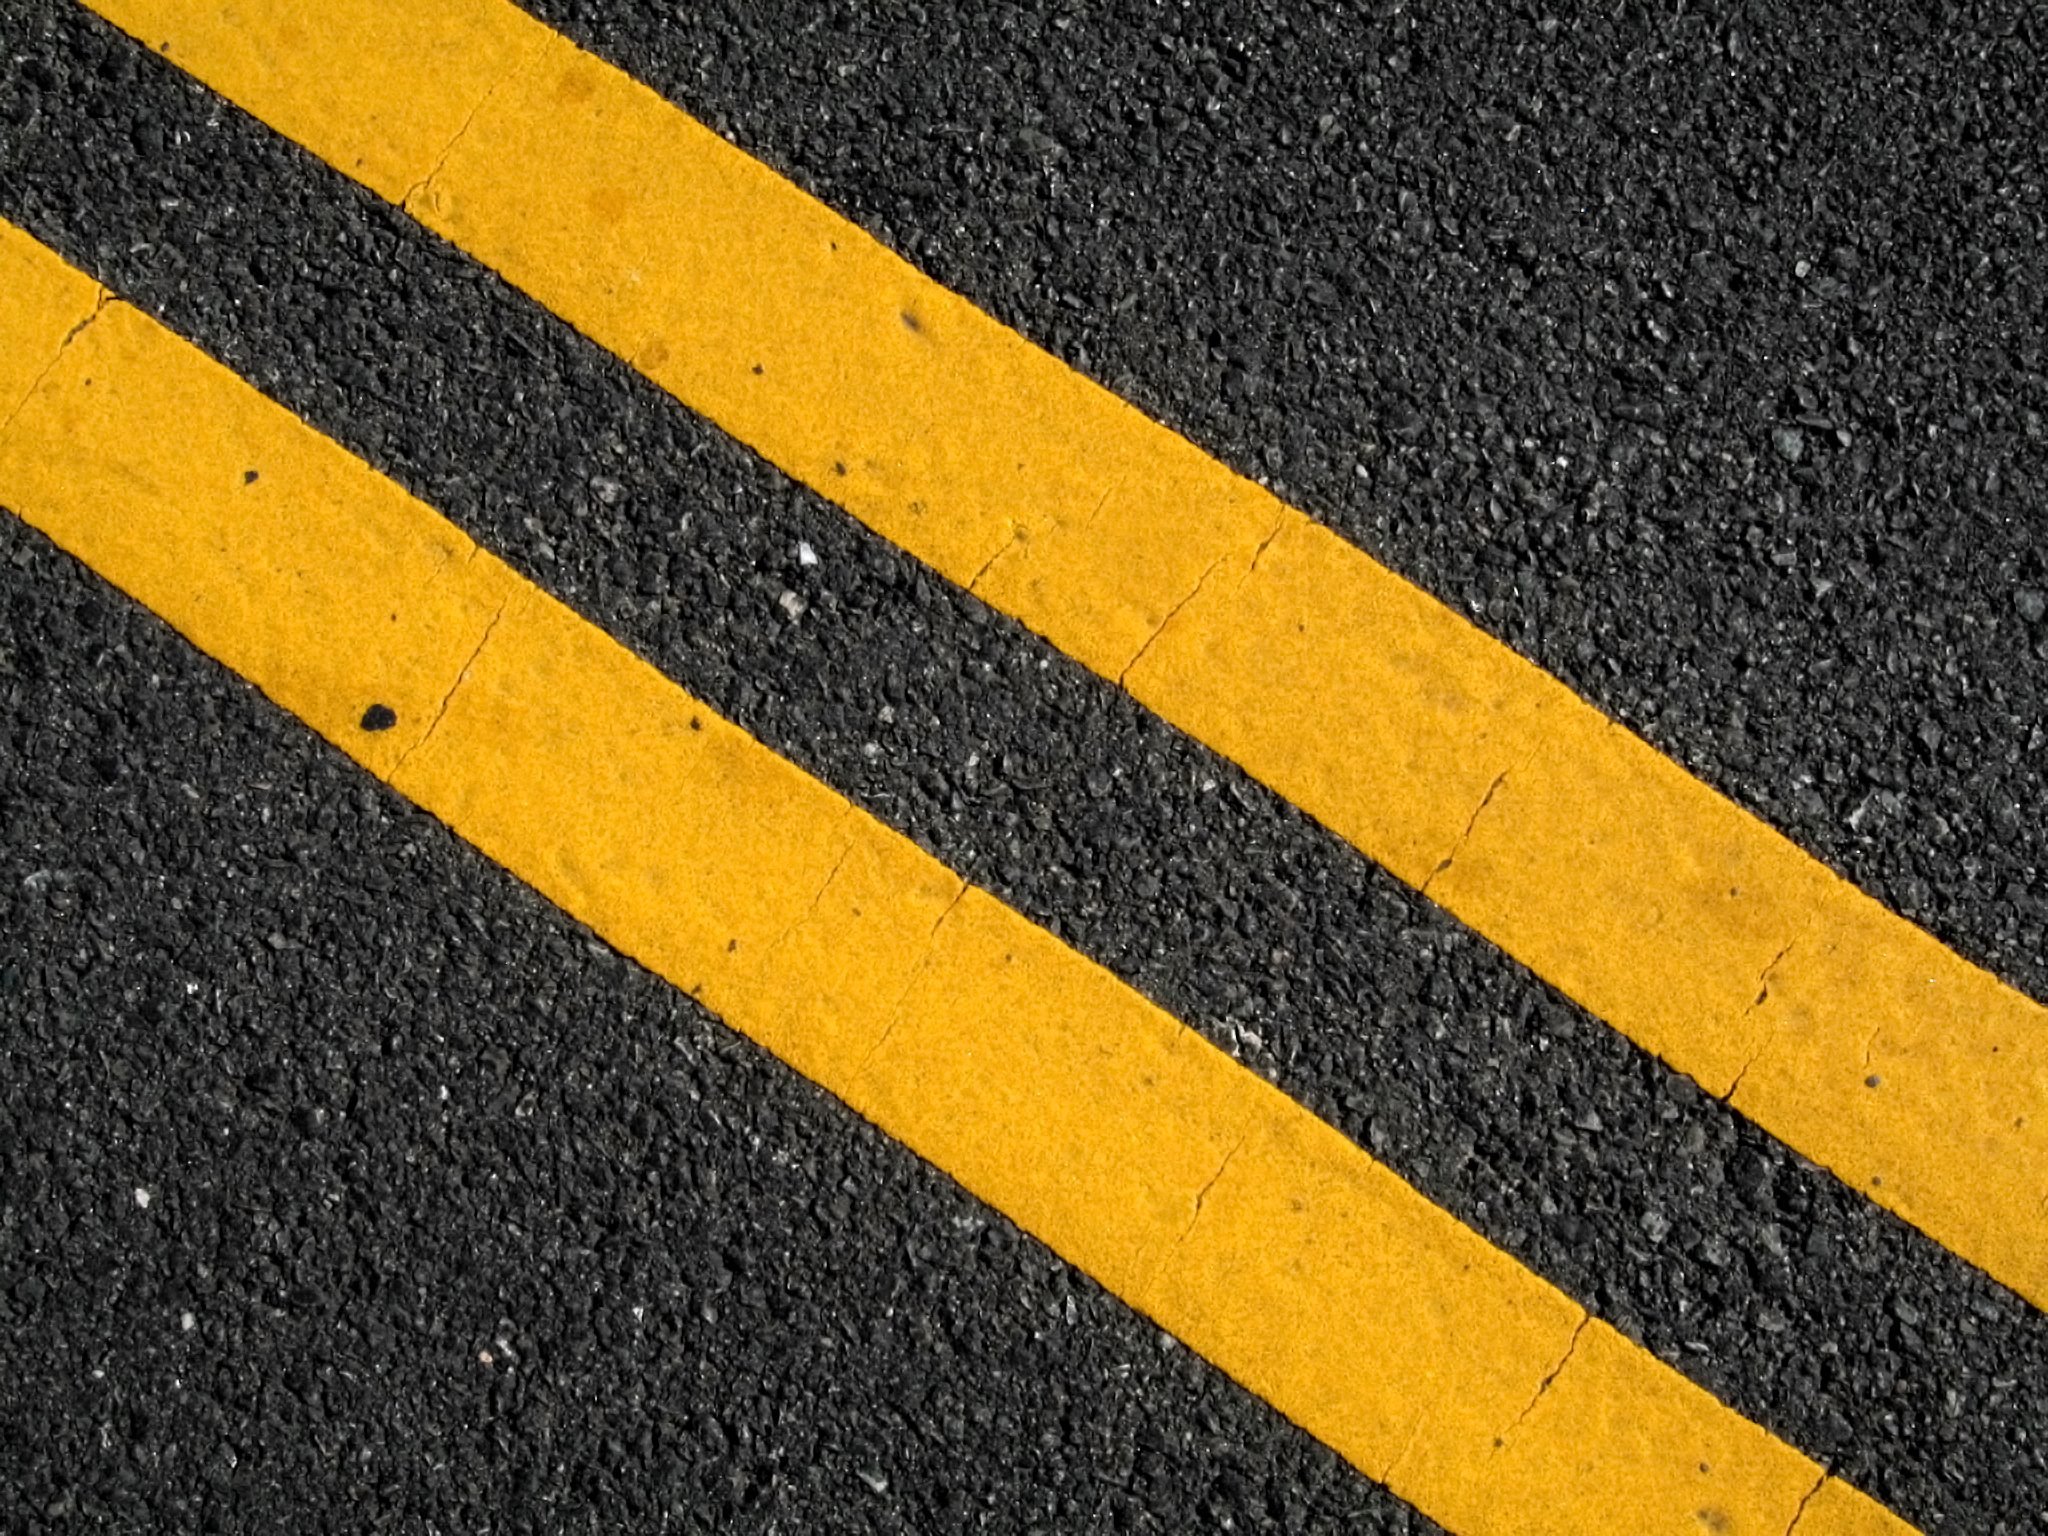 Why Are the Lines on the Roads Yellow? | Reader's Digest